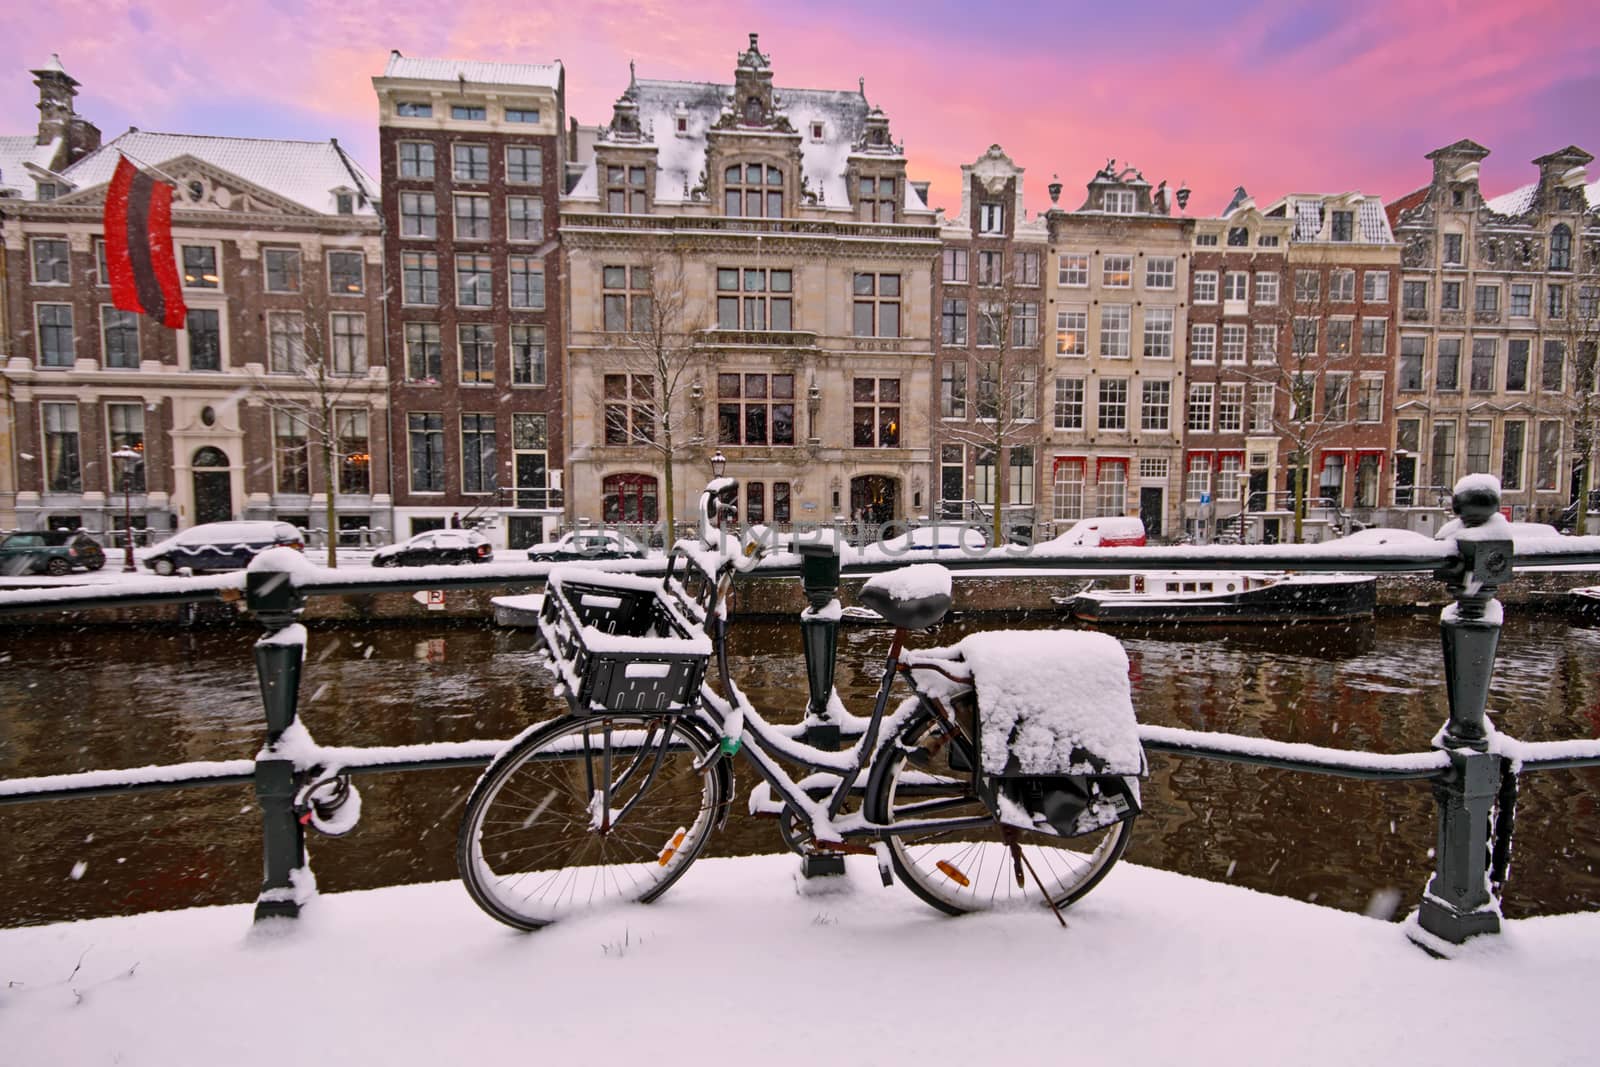 Snowy Amsterdam in winter in the Netherlands at sunset by devy